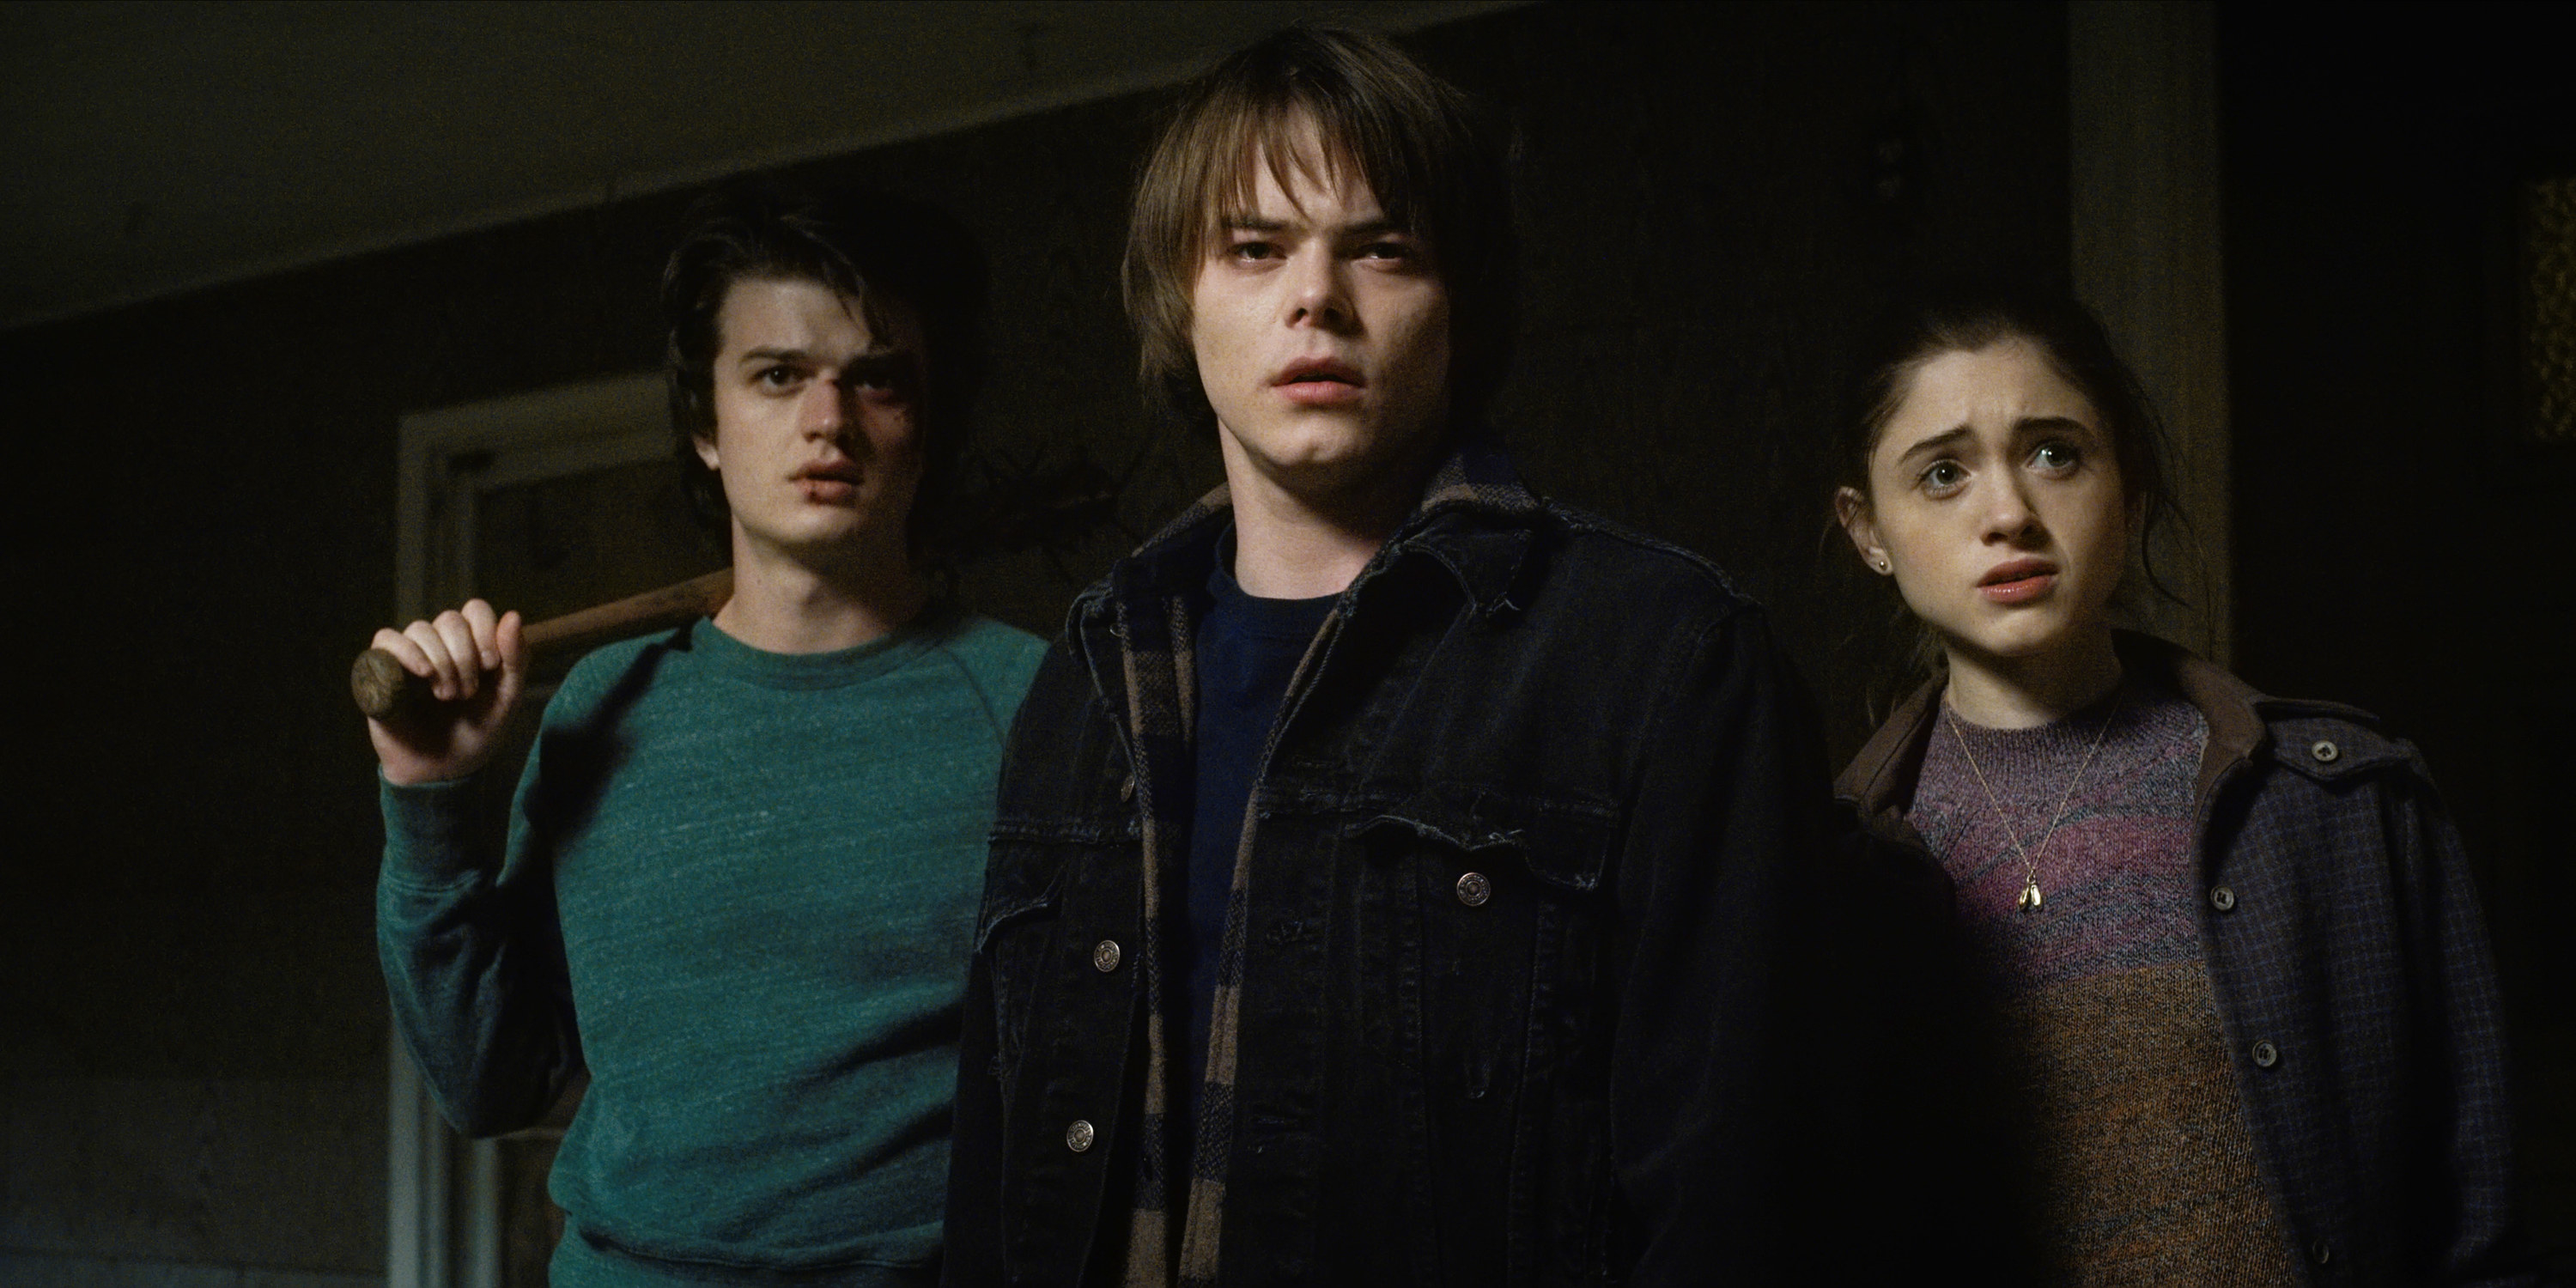 three of the characters standing in a dark room